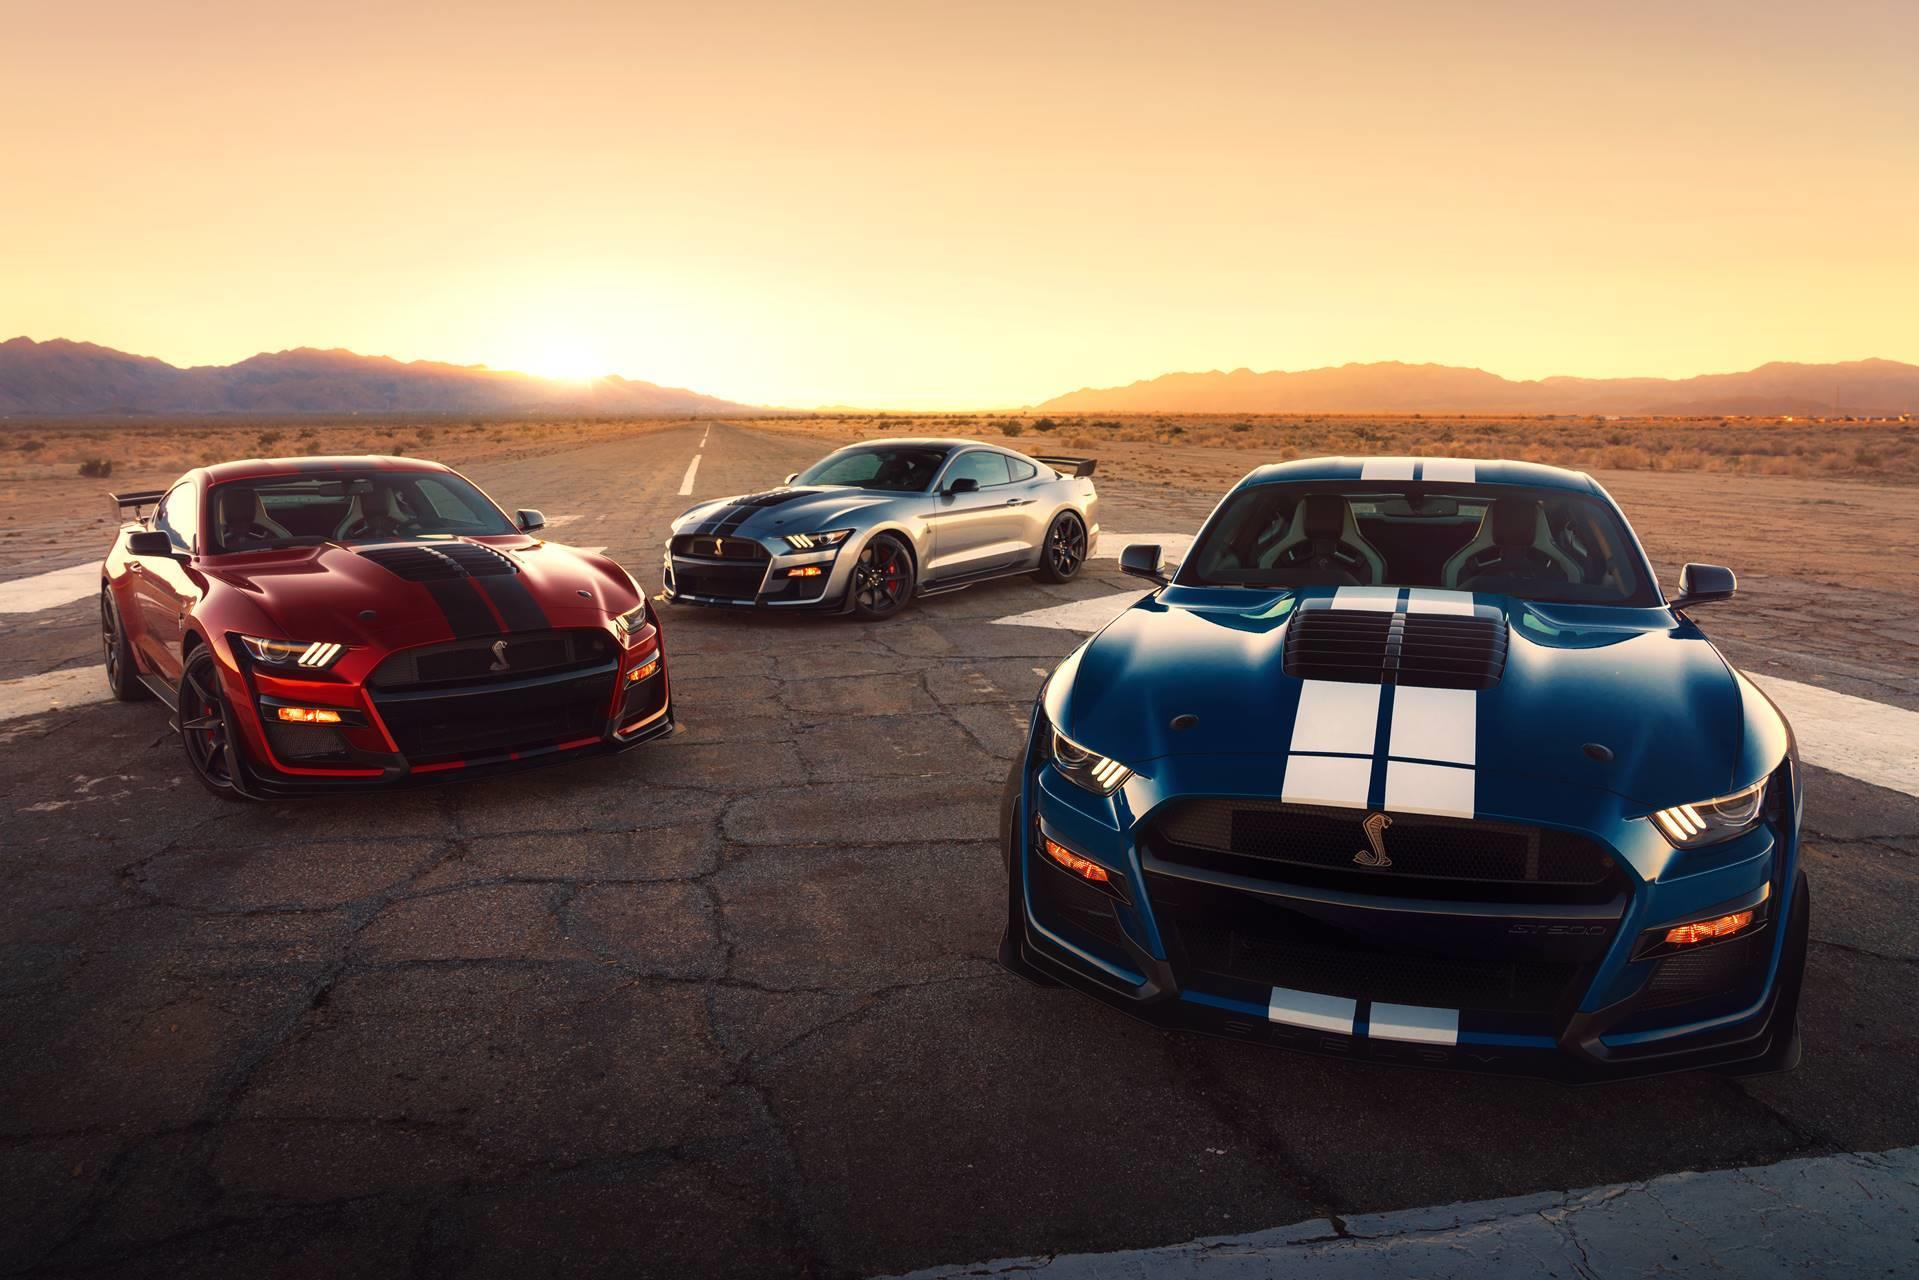 Ford Mustang Shelby GT500 News and Information - .com